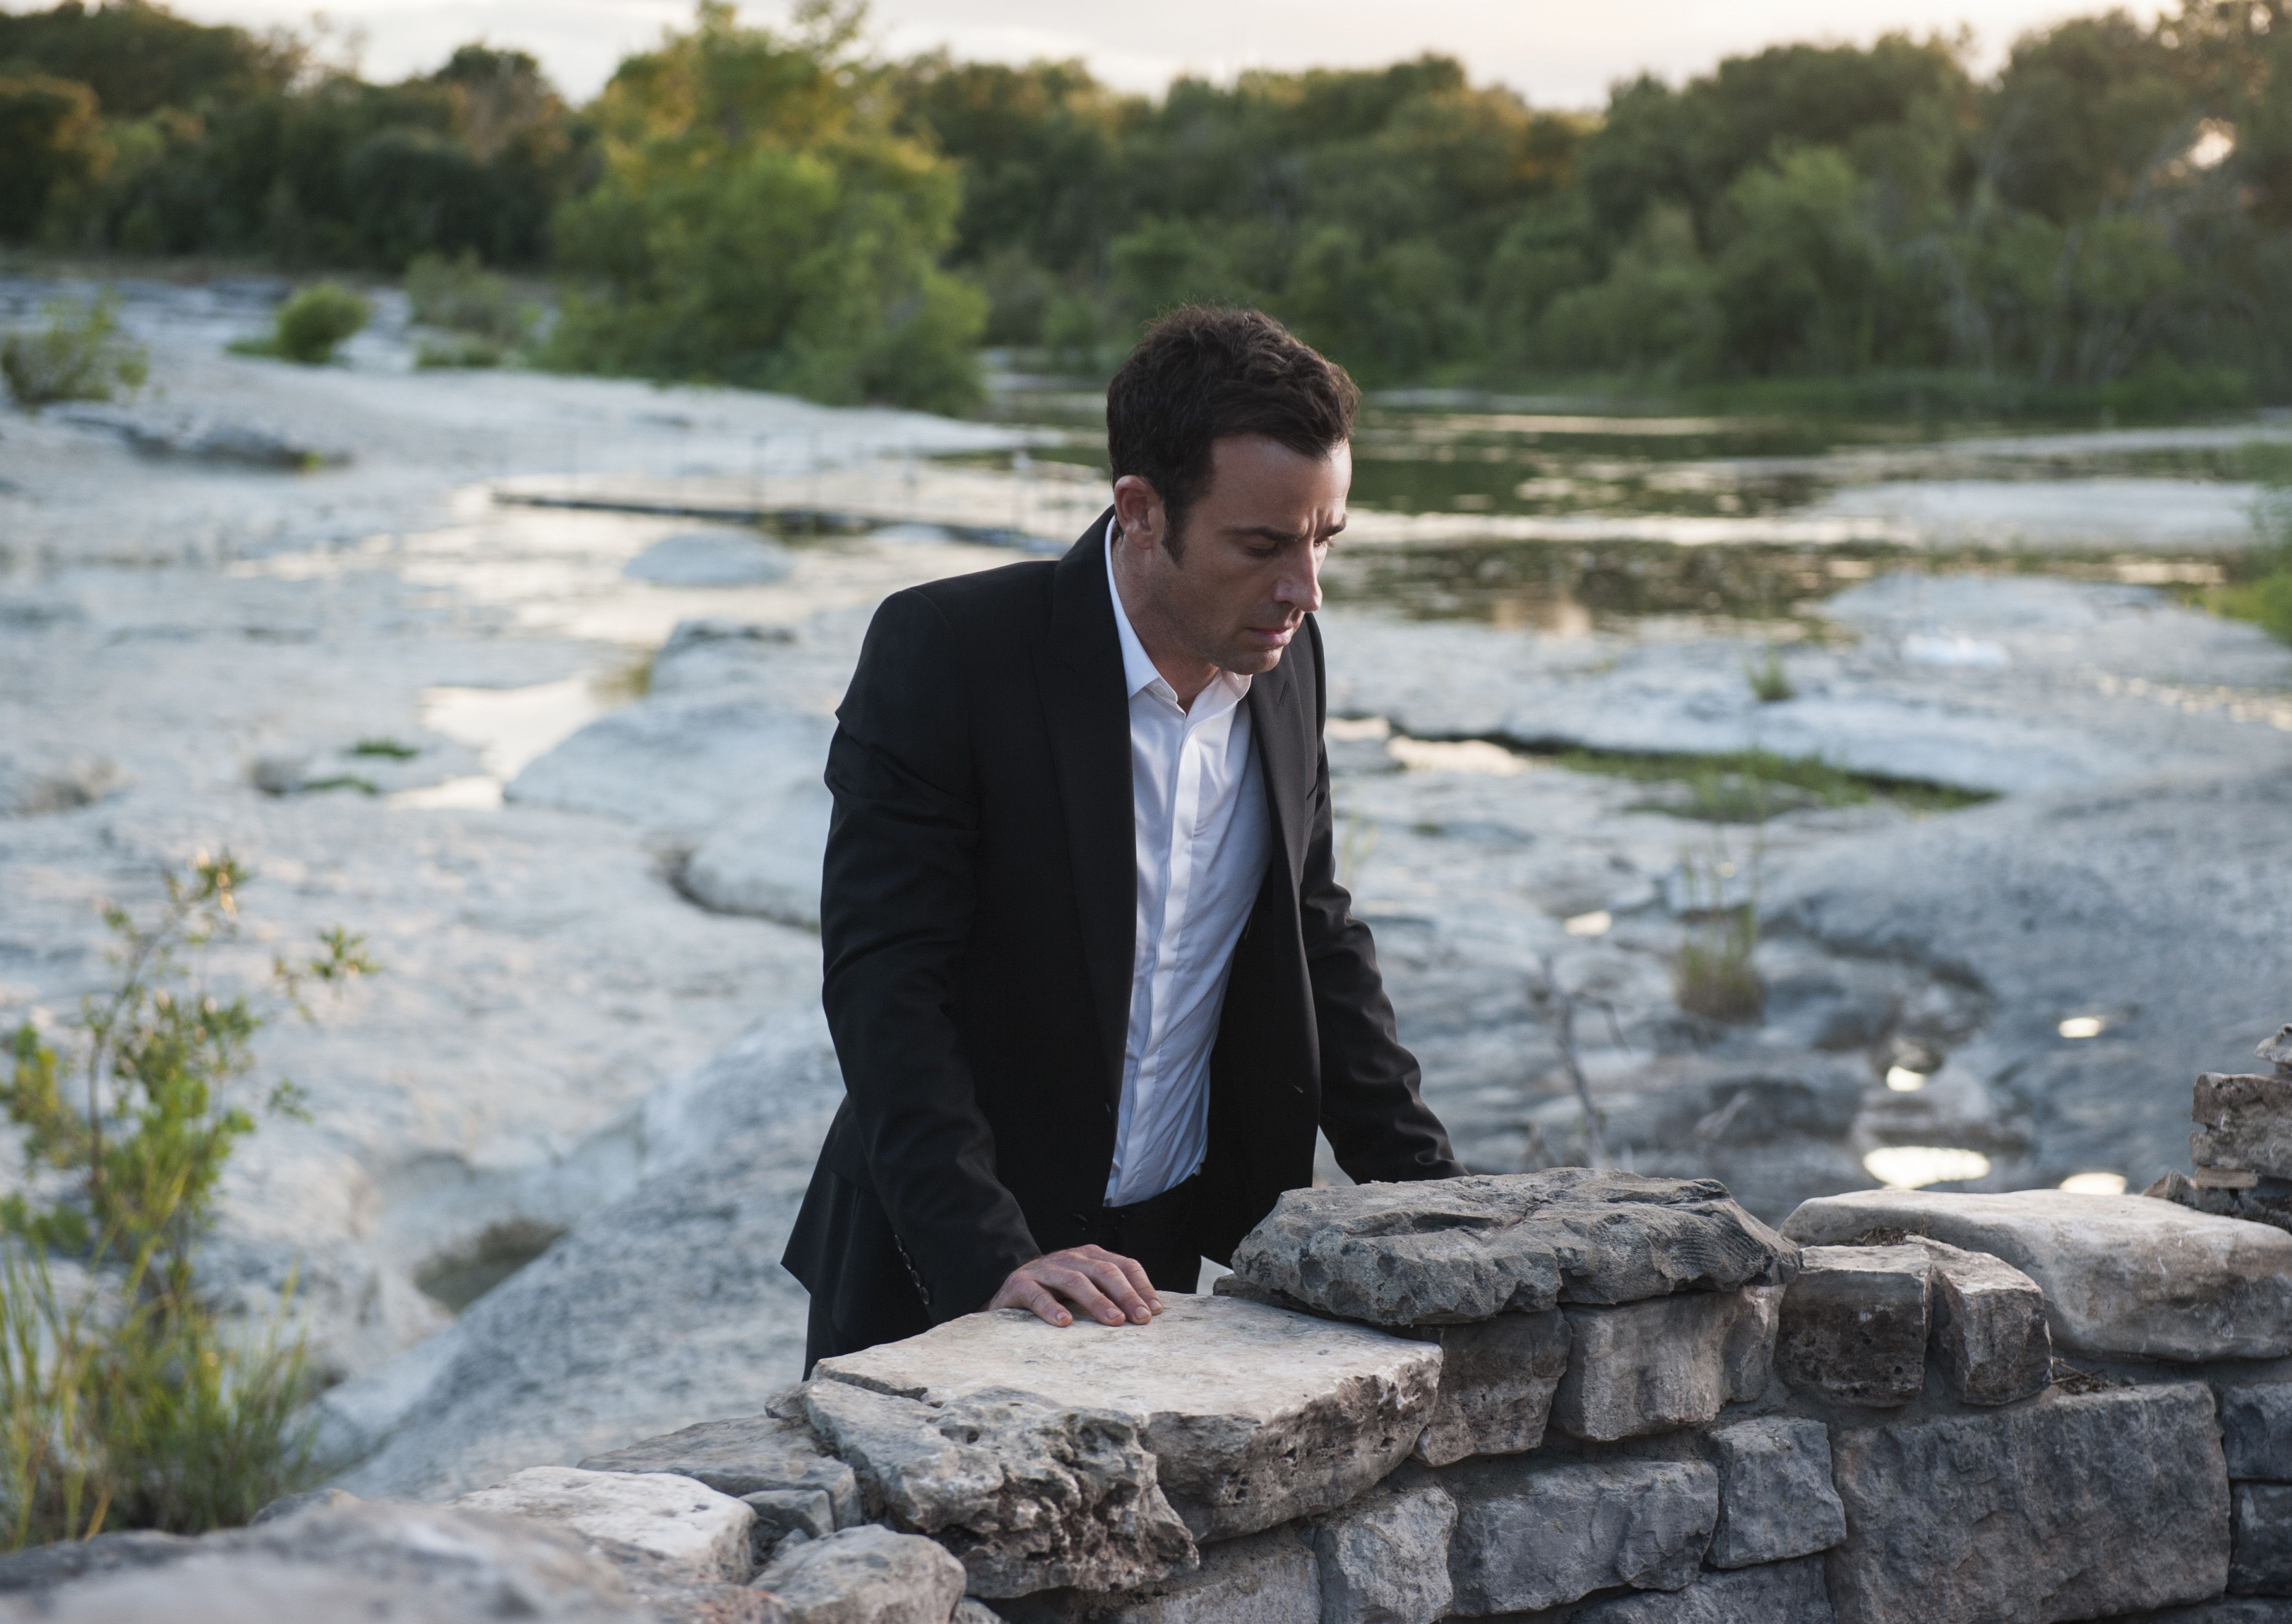 hbo all the leftovers theories you need to know right now